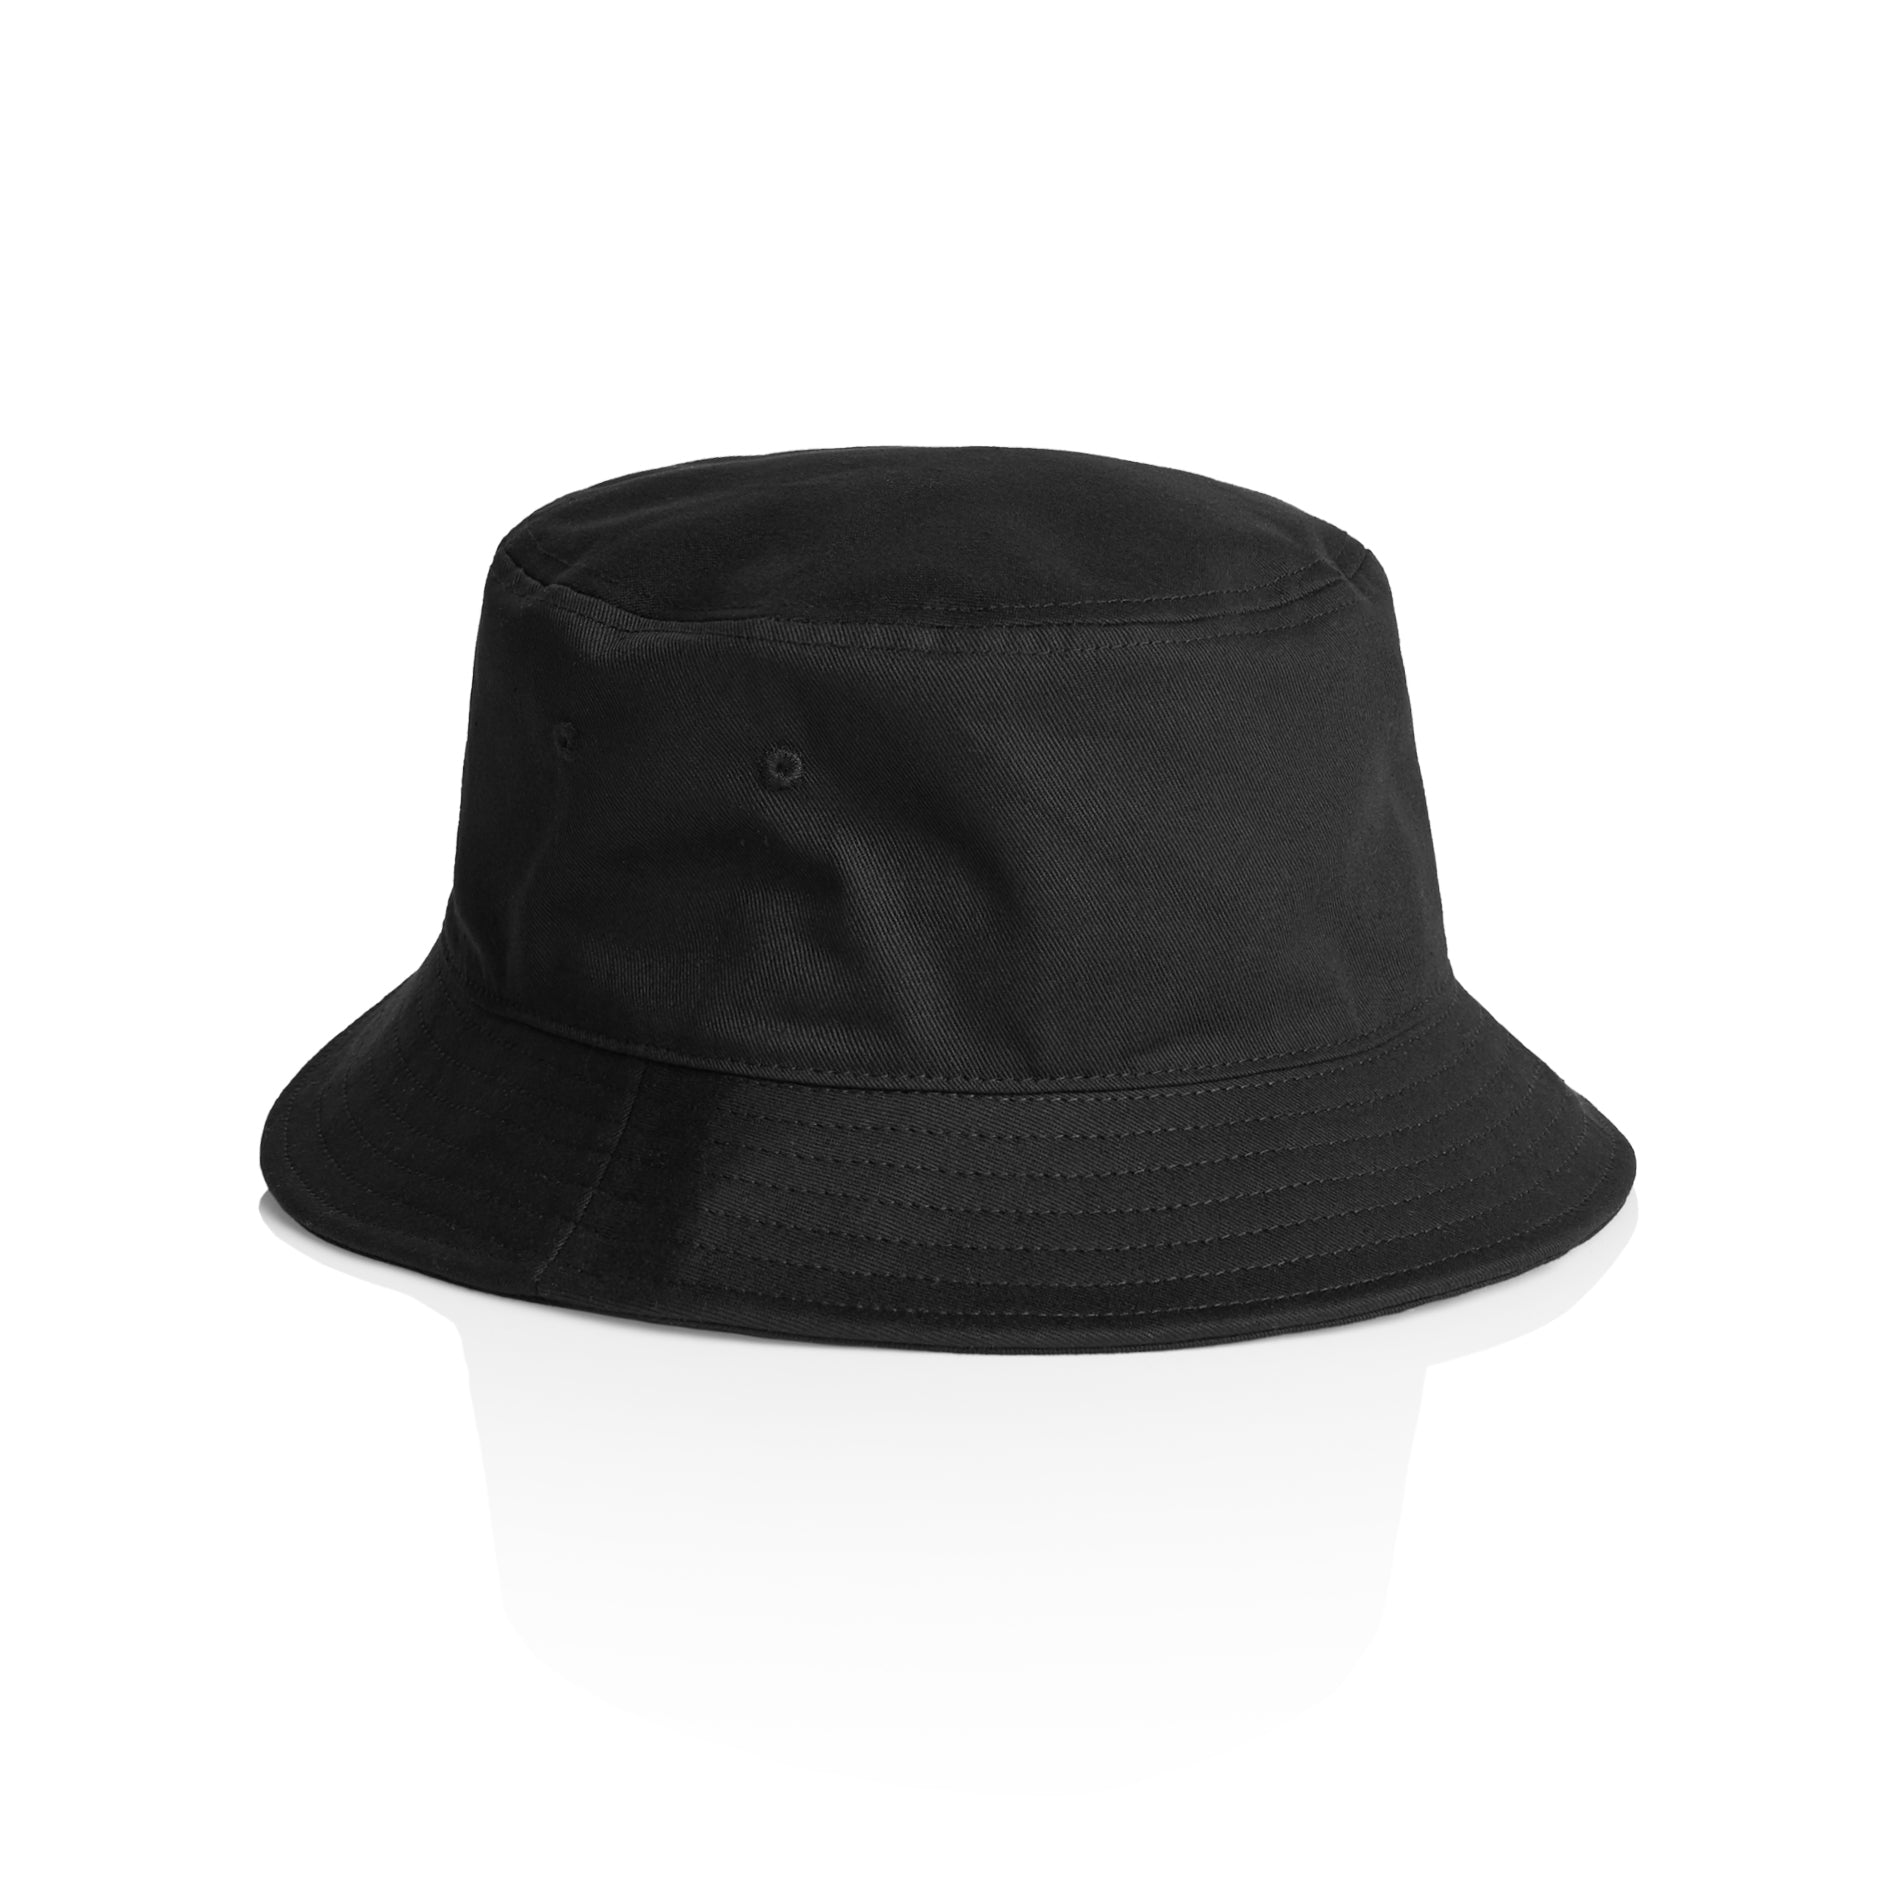 AS Colour Bucket Hat